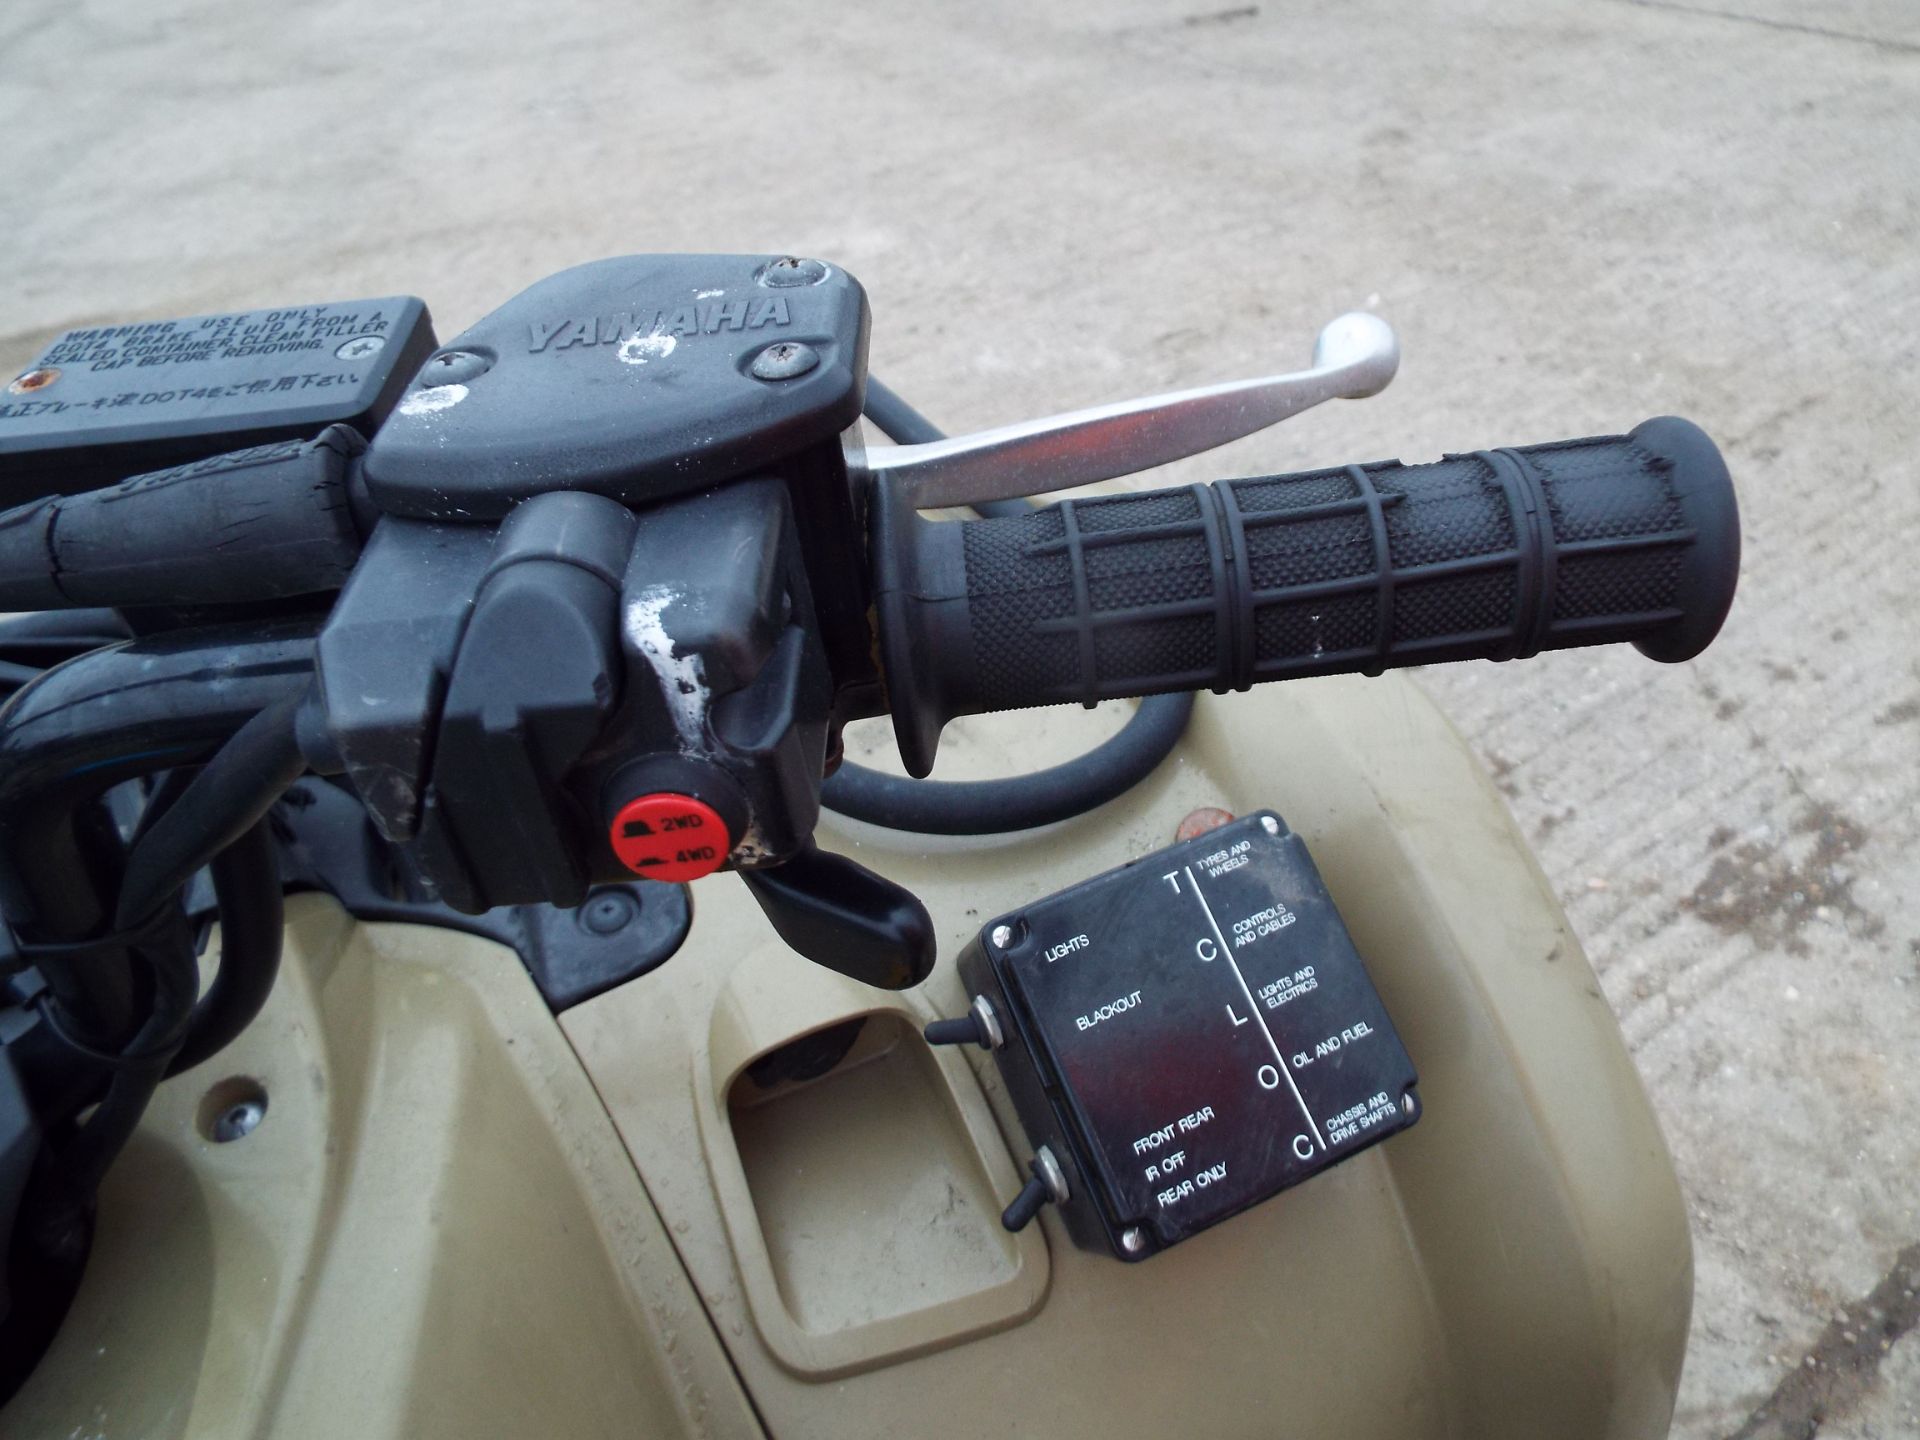 Military Specification Yamaha Grizzly 450 4 x 4 ATV Quad Bike Complete with Winch - Image 12 of 20